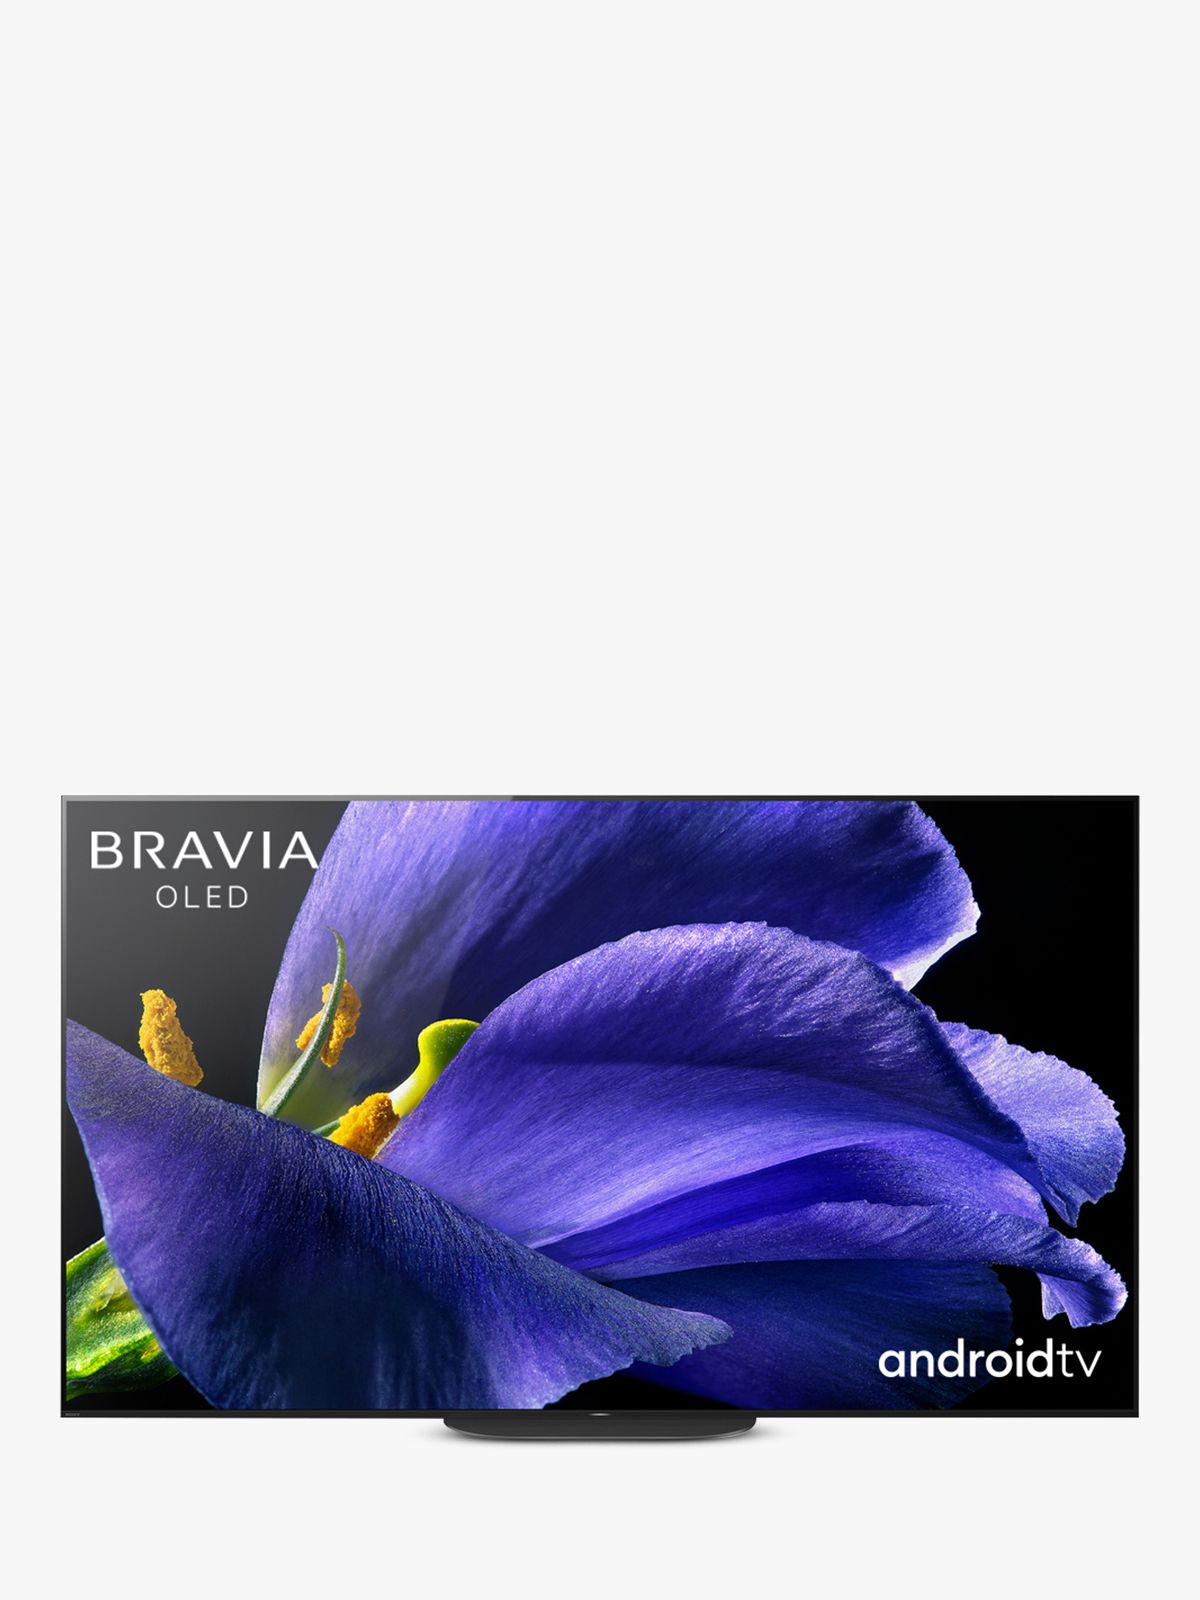 Sony Bravia KD55AG9 (2019) OLED HDR 4K Ultra HD Smart Android TV, 55 inch with Freeview HD, Youview, & Acoustic Surface Audio+, Black